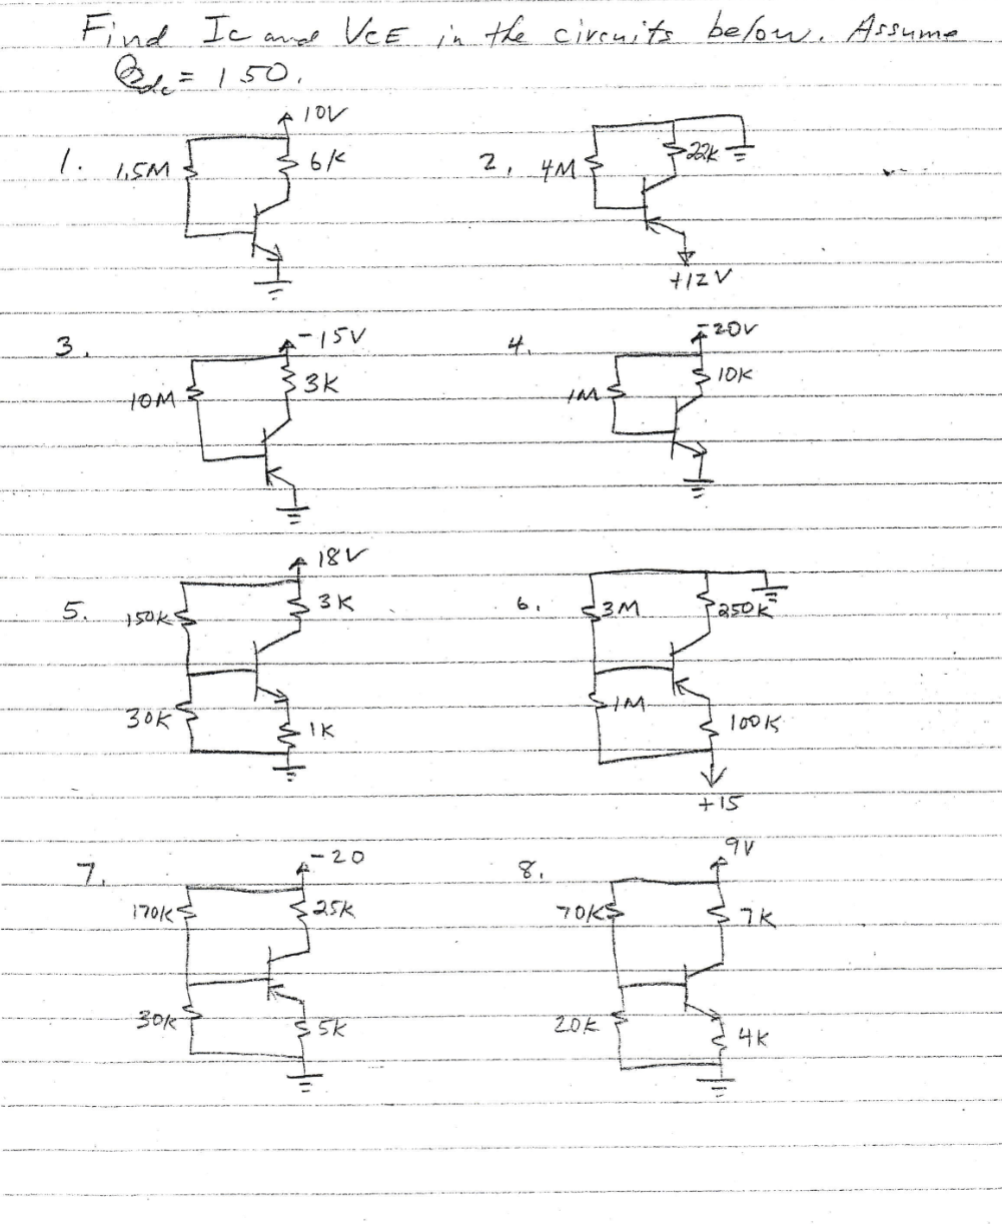 Find Ic and VCE in the circuits below. Assume
= 150.
1.
1.5M
102
6/
2,
4M3
3.
-15V
≤3K
TOM
7
+12V
20V
10K
182
3K
6.
150ks
3M
$250k
"30K
IK
-M.
100k
+15
9V
-20
8,
17017
25k
70KS
7K
30K
201
$5K
4K